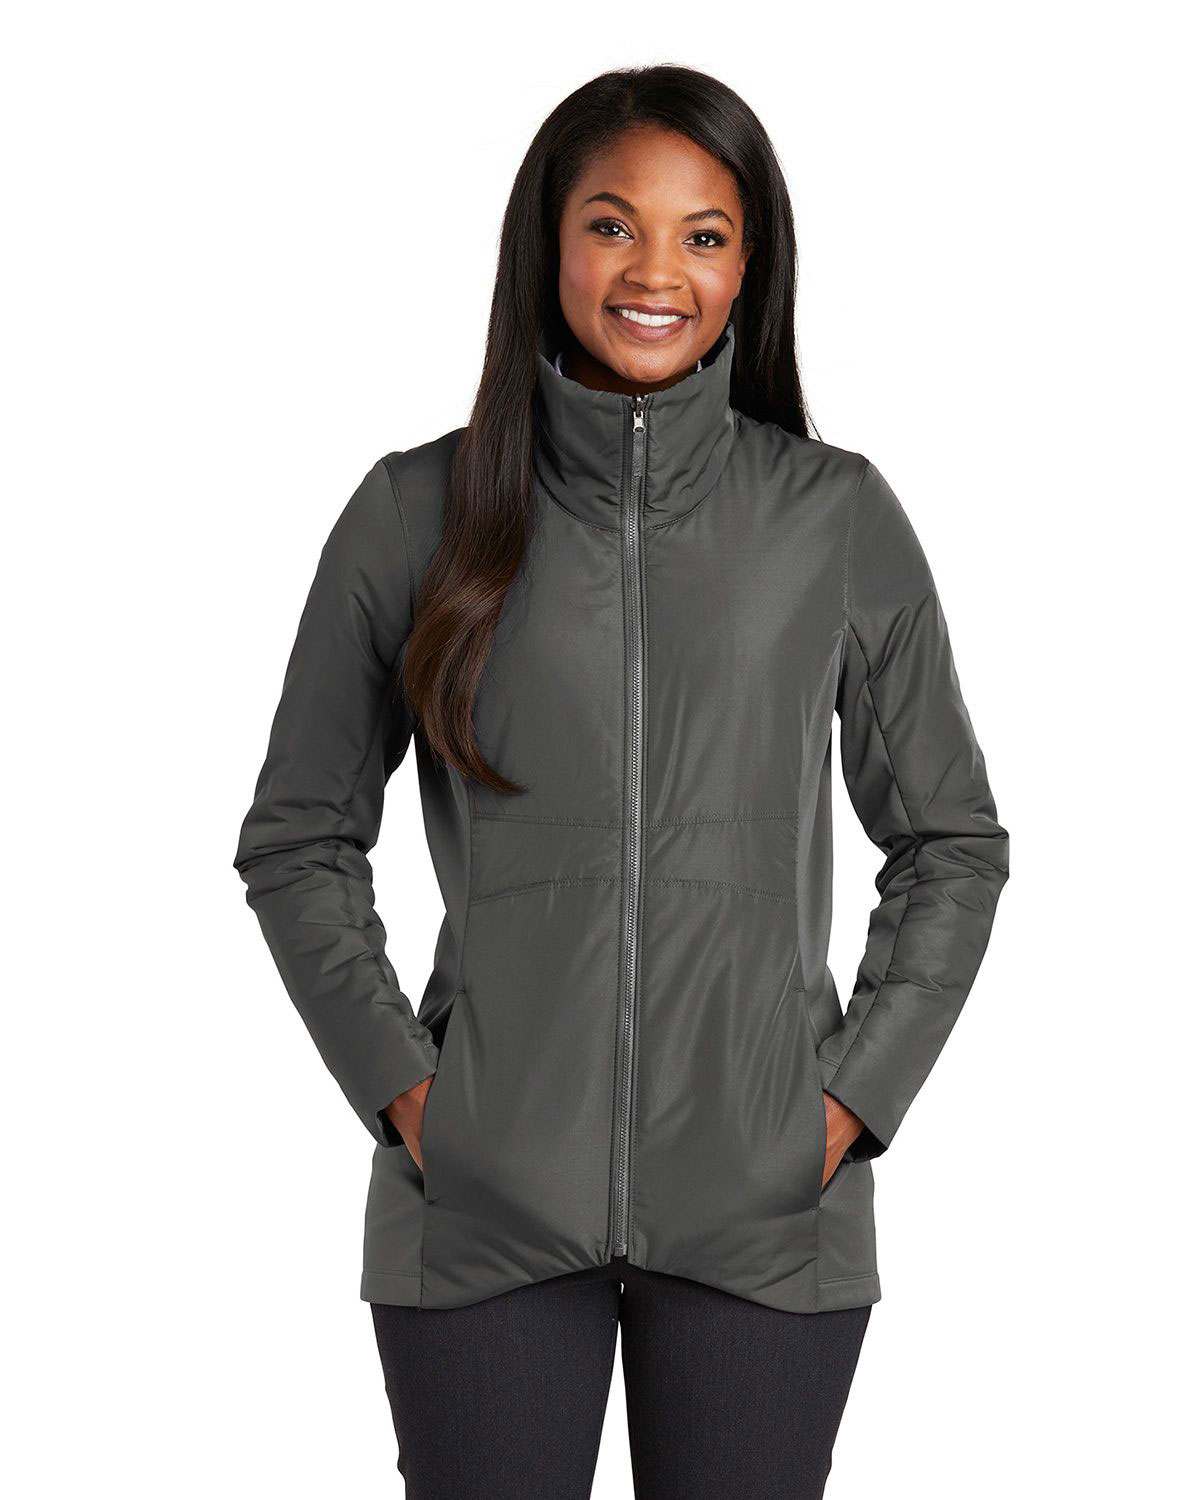 Port Authority L902 Women Collective Insulated Jacket